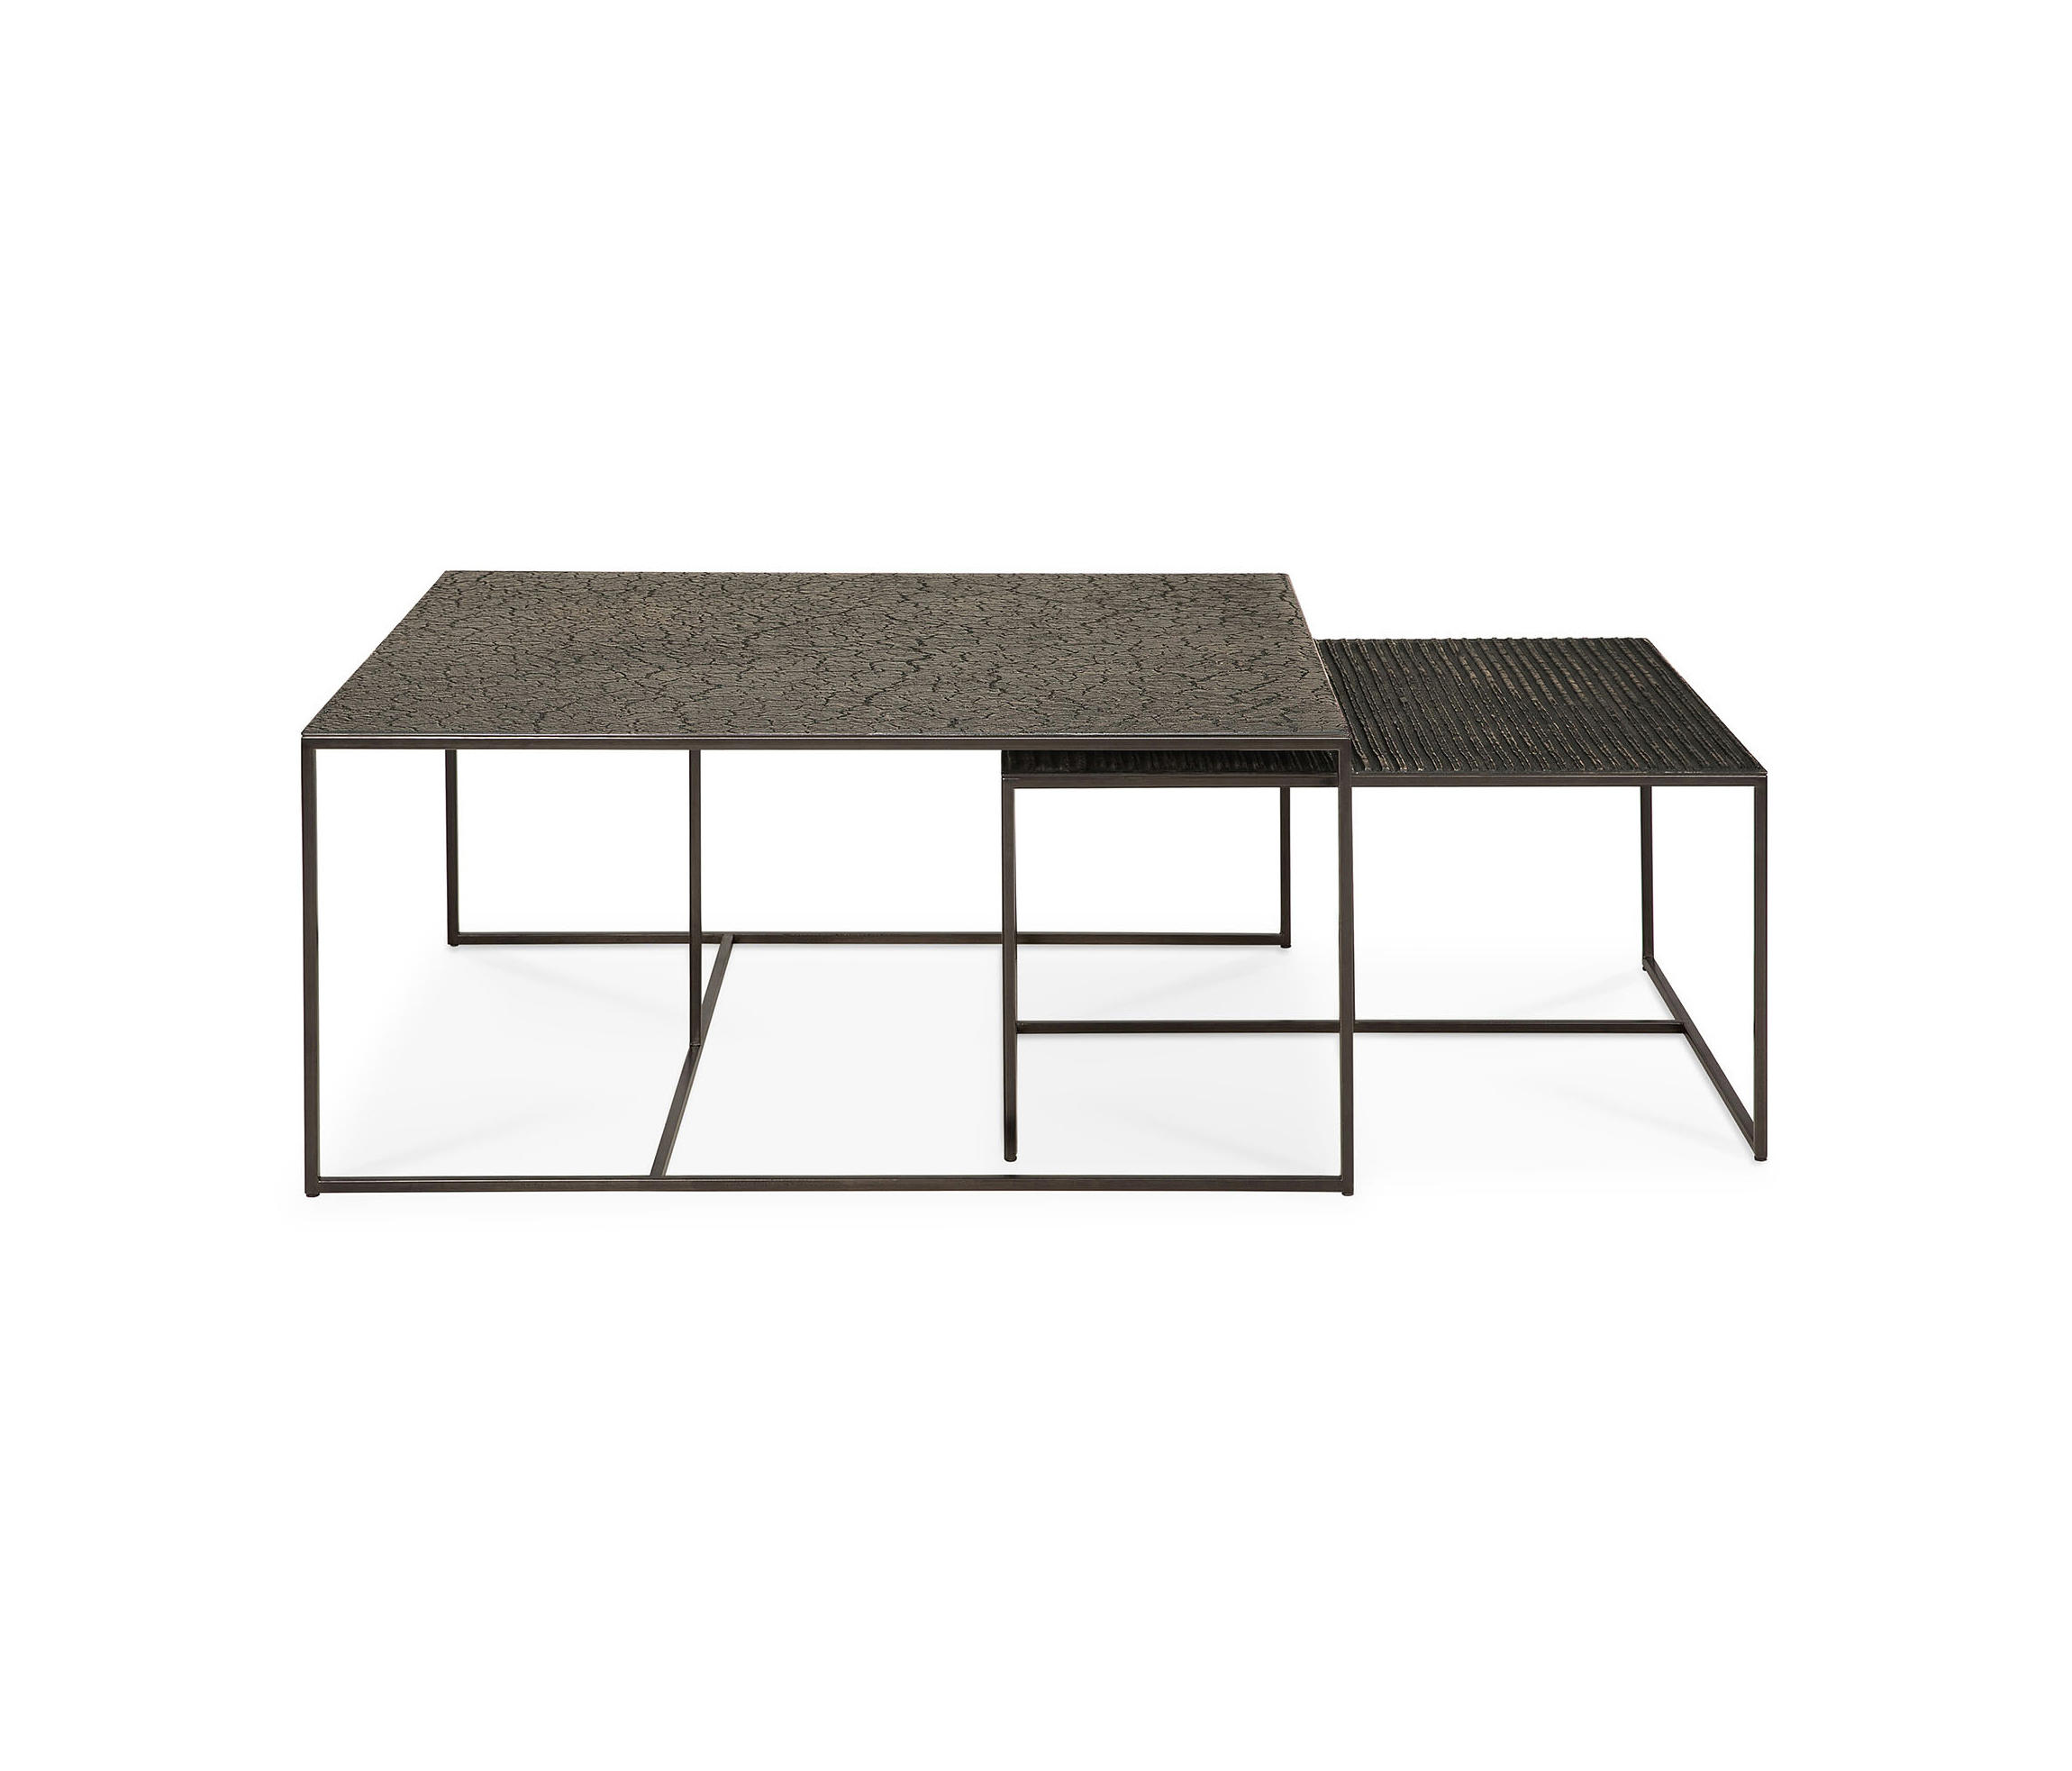 Pentagon Tables by Ethnicraft